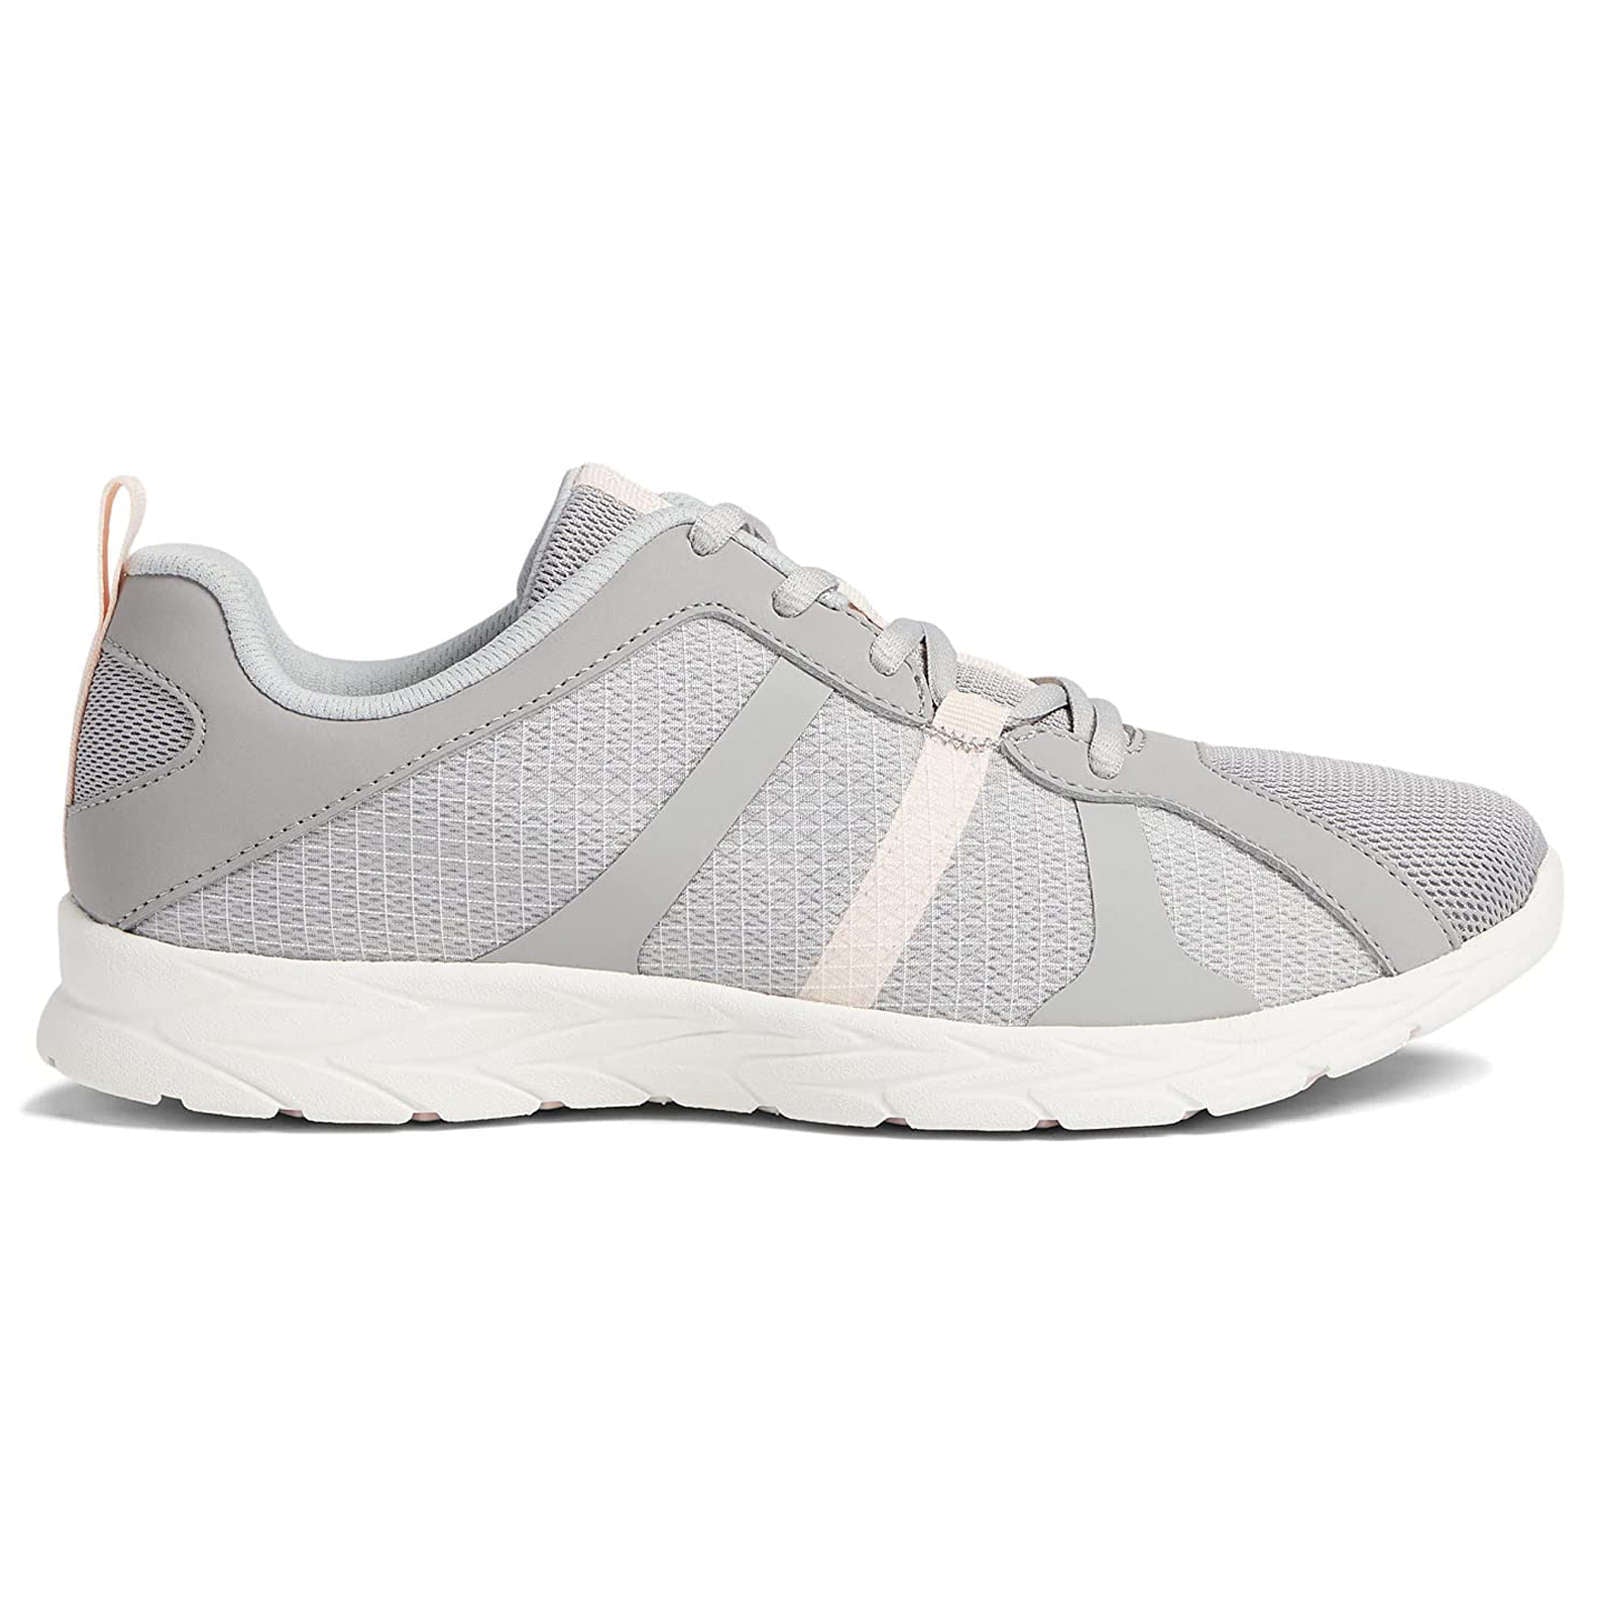 Vionic Brisk Radiant Synthetic Leather Womens Trainers#color_light grey cloud pink